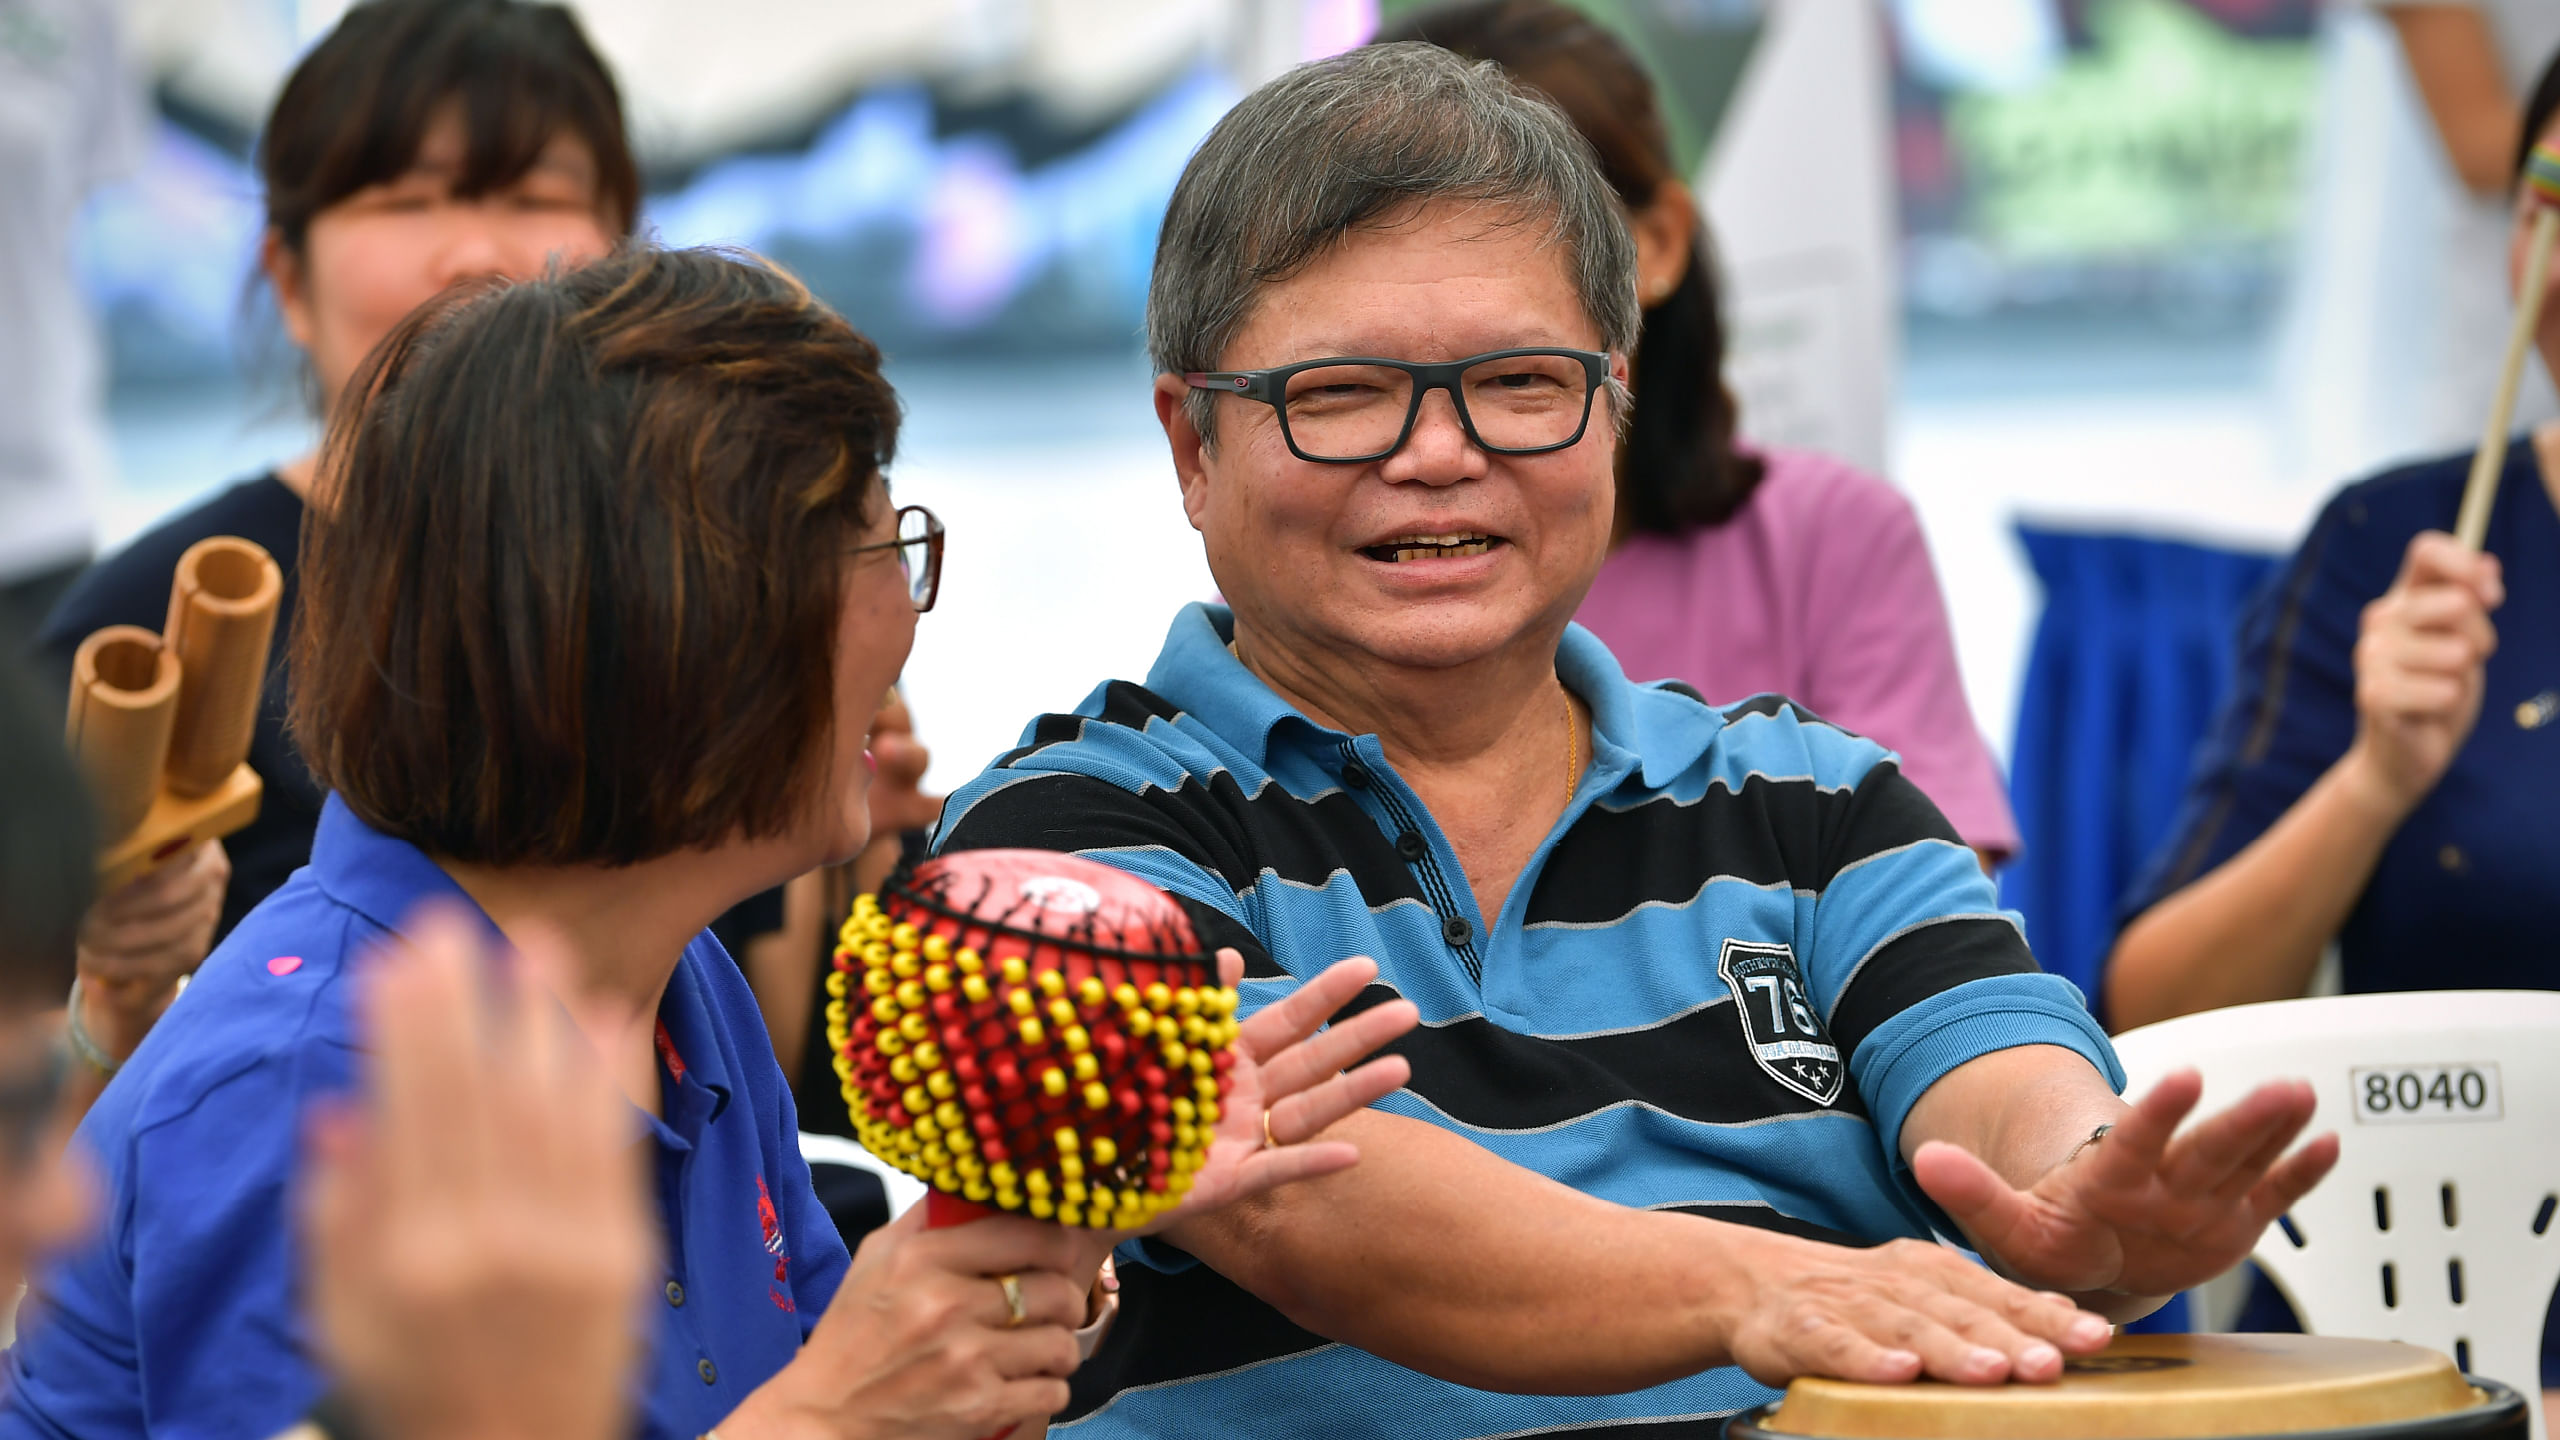 Lai Quen and Steven shares a joke during a drumming session with other PWDs, their caregivers and members of the public at *SCAPE Singapore on World's Alzheimer's Day on Sept 21, 2019.